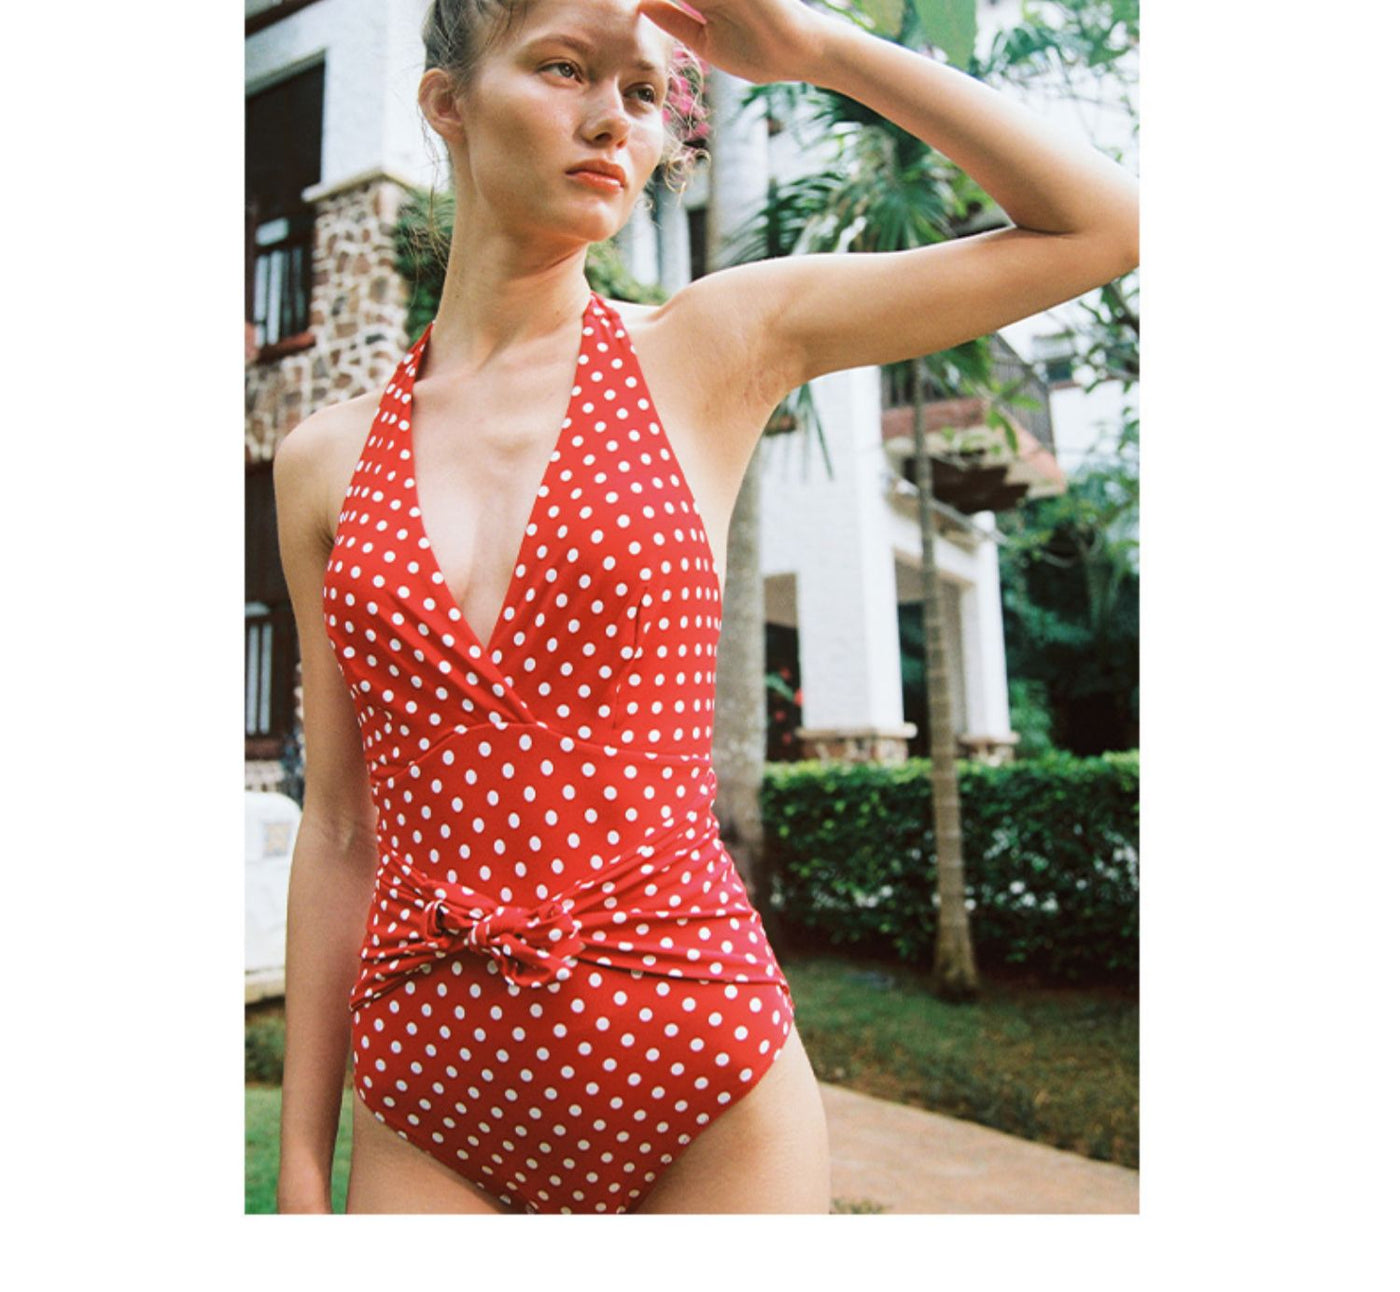 Vintage Style Bathing Suit Backless One Piece Halter Swimsuit